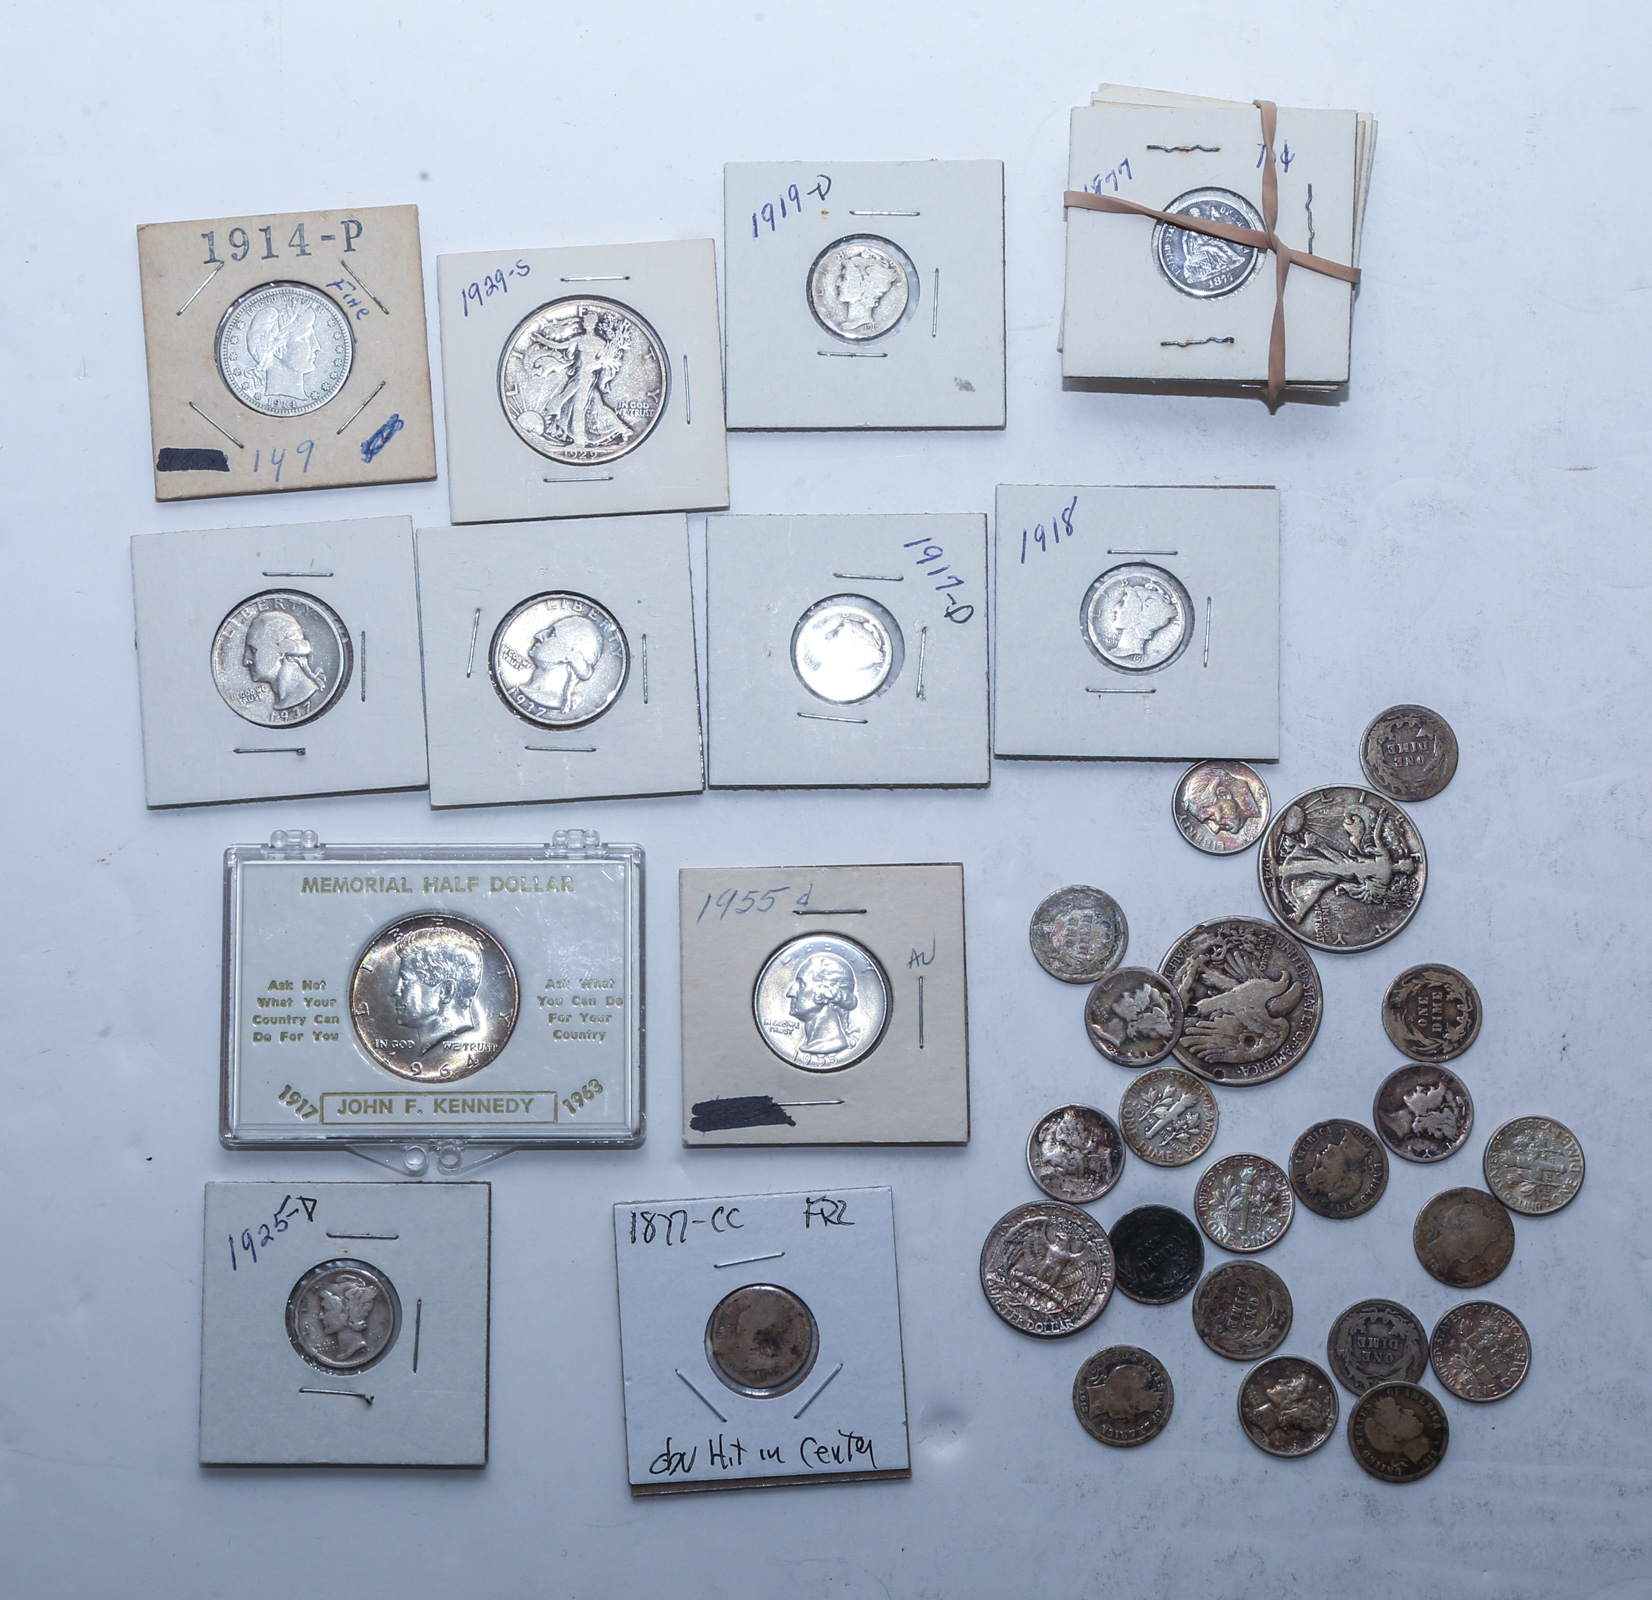 SLIGHTLY BETTER US SILVER COINS